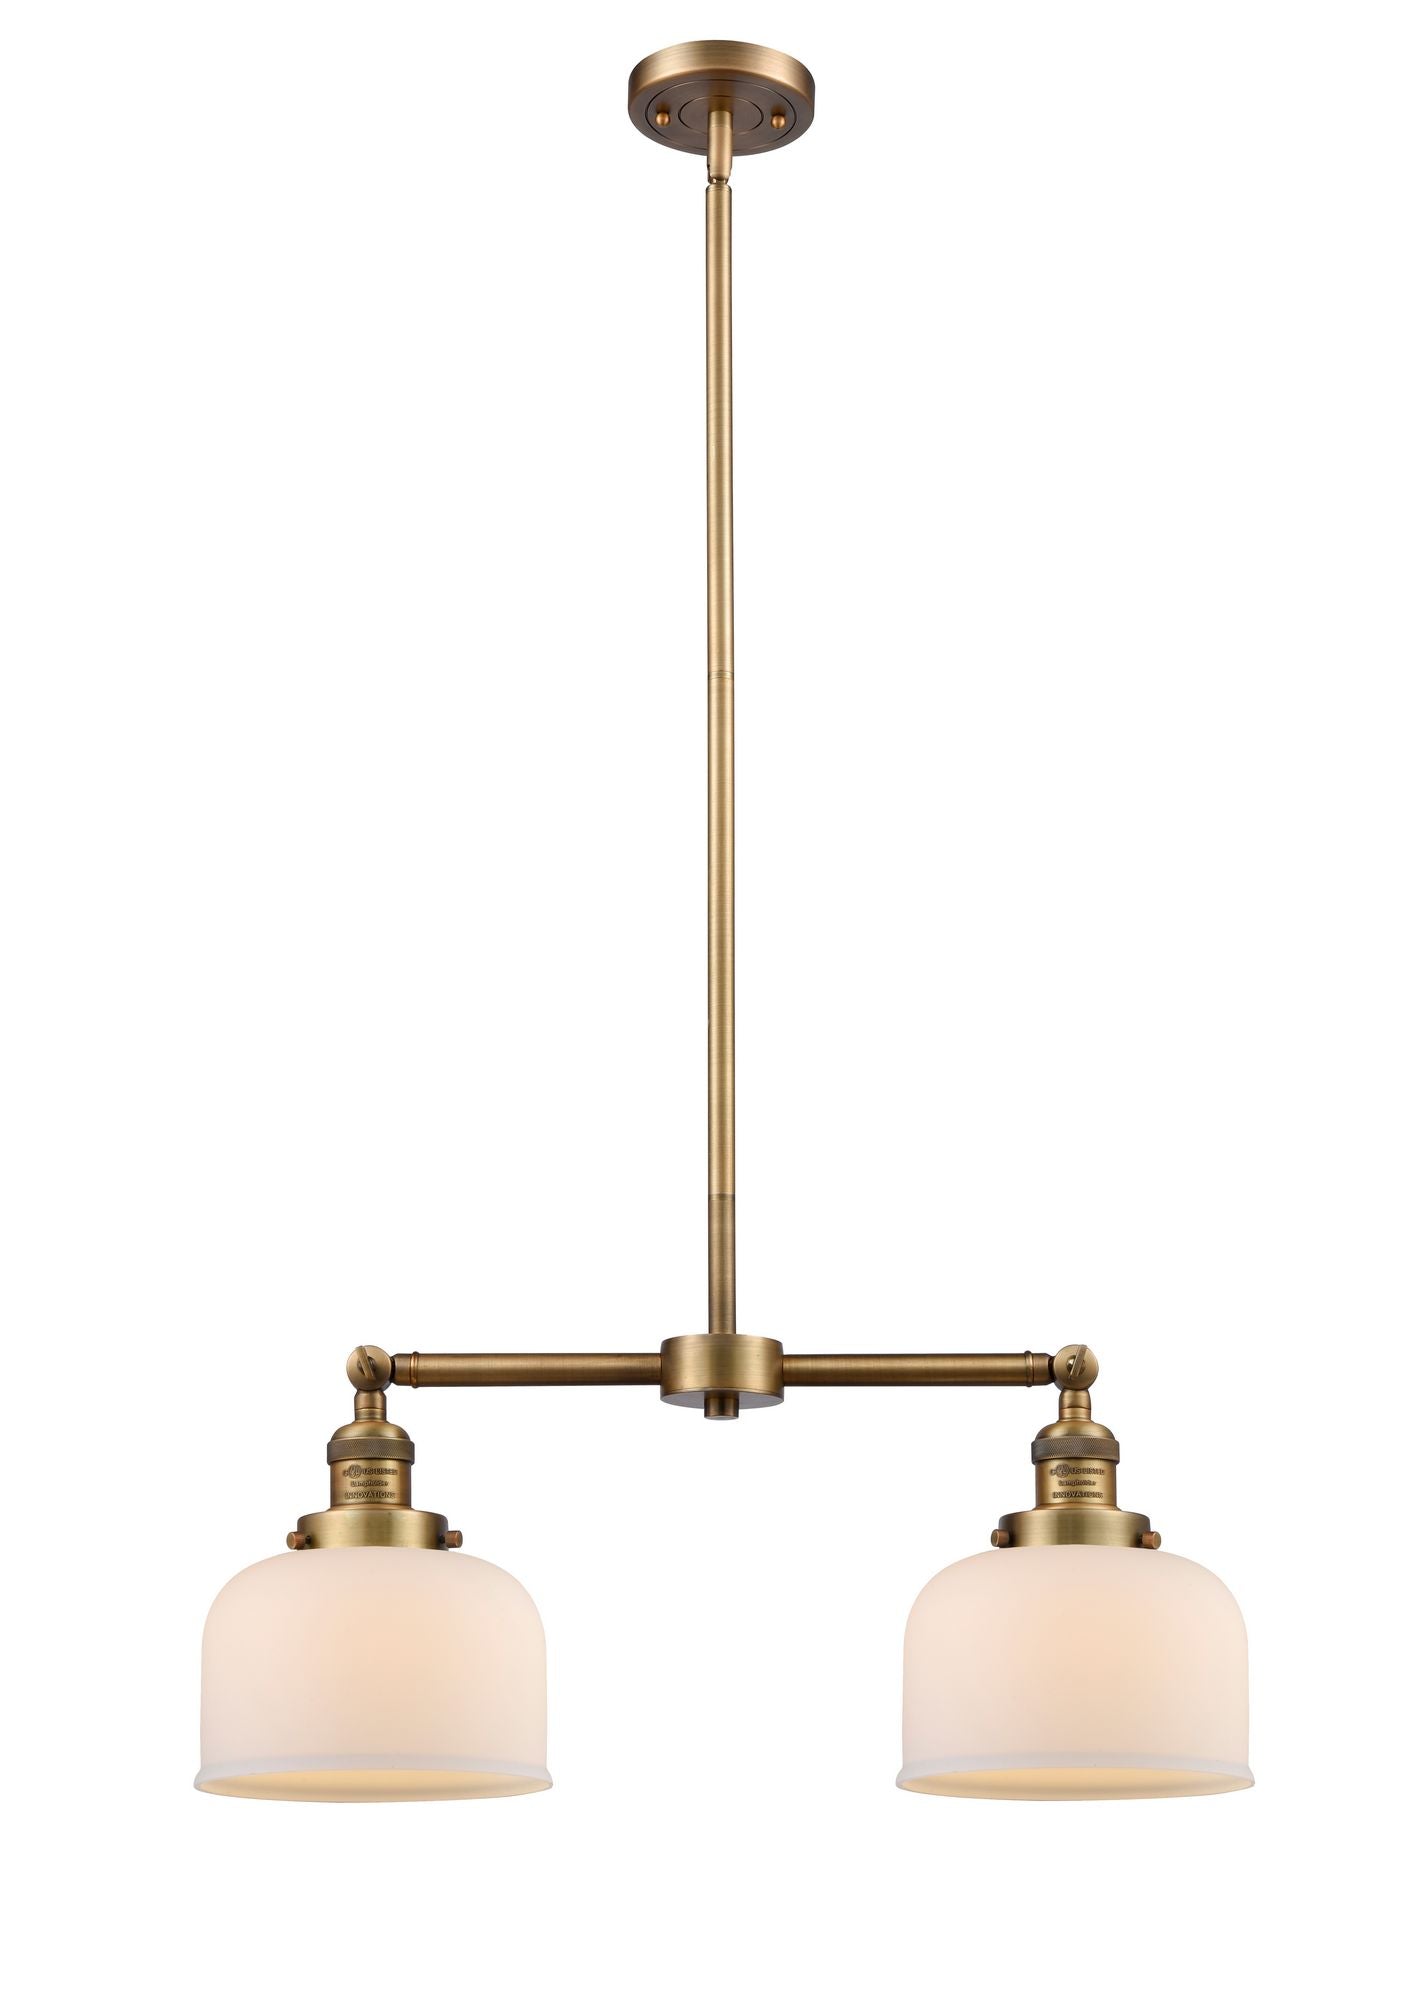 209-BB-G71 2-Light 21" Brushed Brass Island Light - Matte White Cased Large Bell Glass - LED Bulb - Dimmensions: 21 x 5 x 10<br>Minimum Height : 20.875<br>Maximum Height : 44.875 - Sloped Ceiling Compatible: Yes